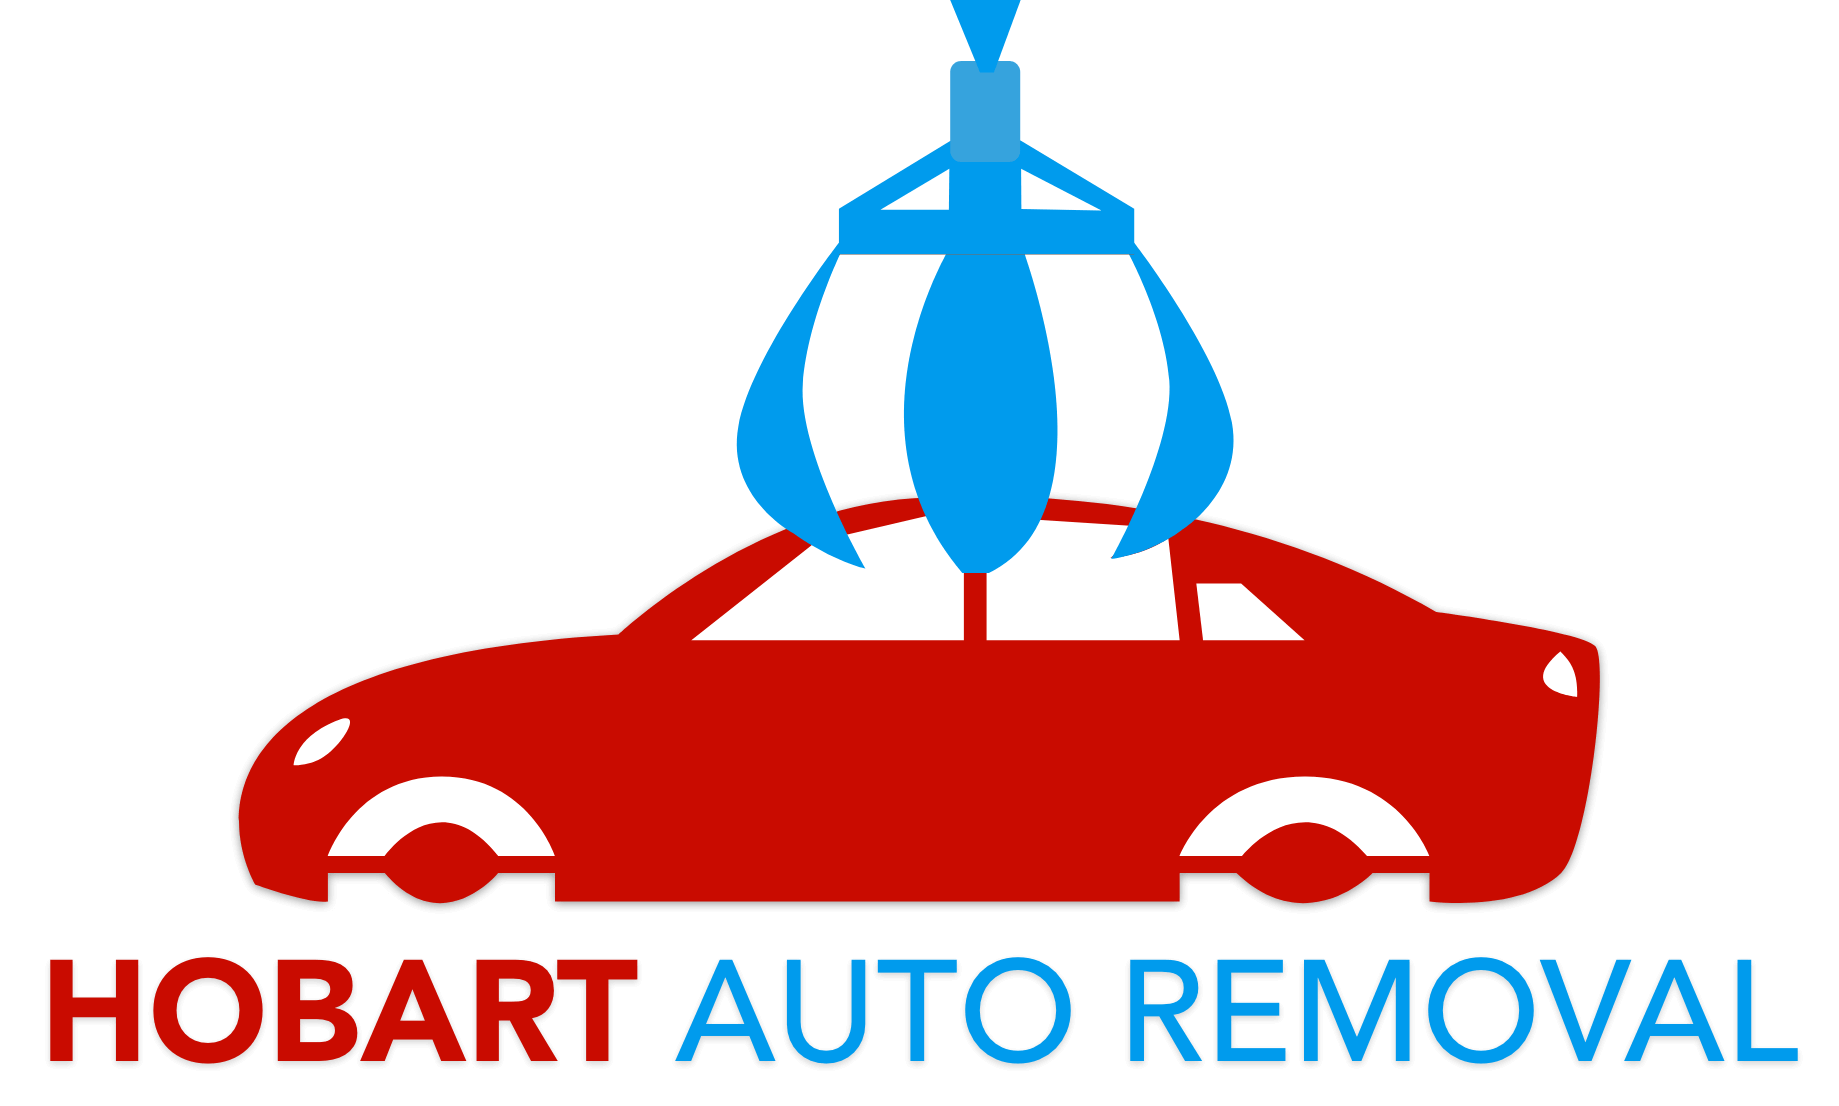 Looking for Top Car Removal Hobart Companies?